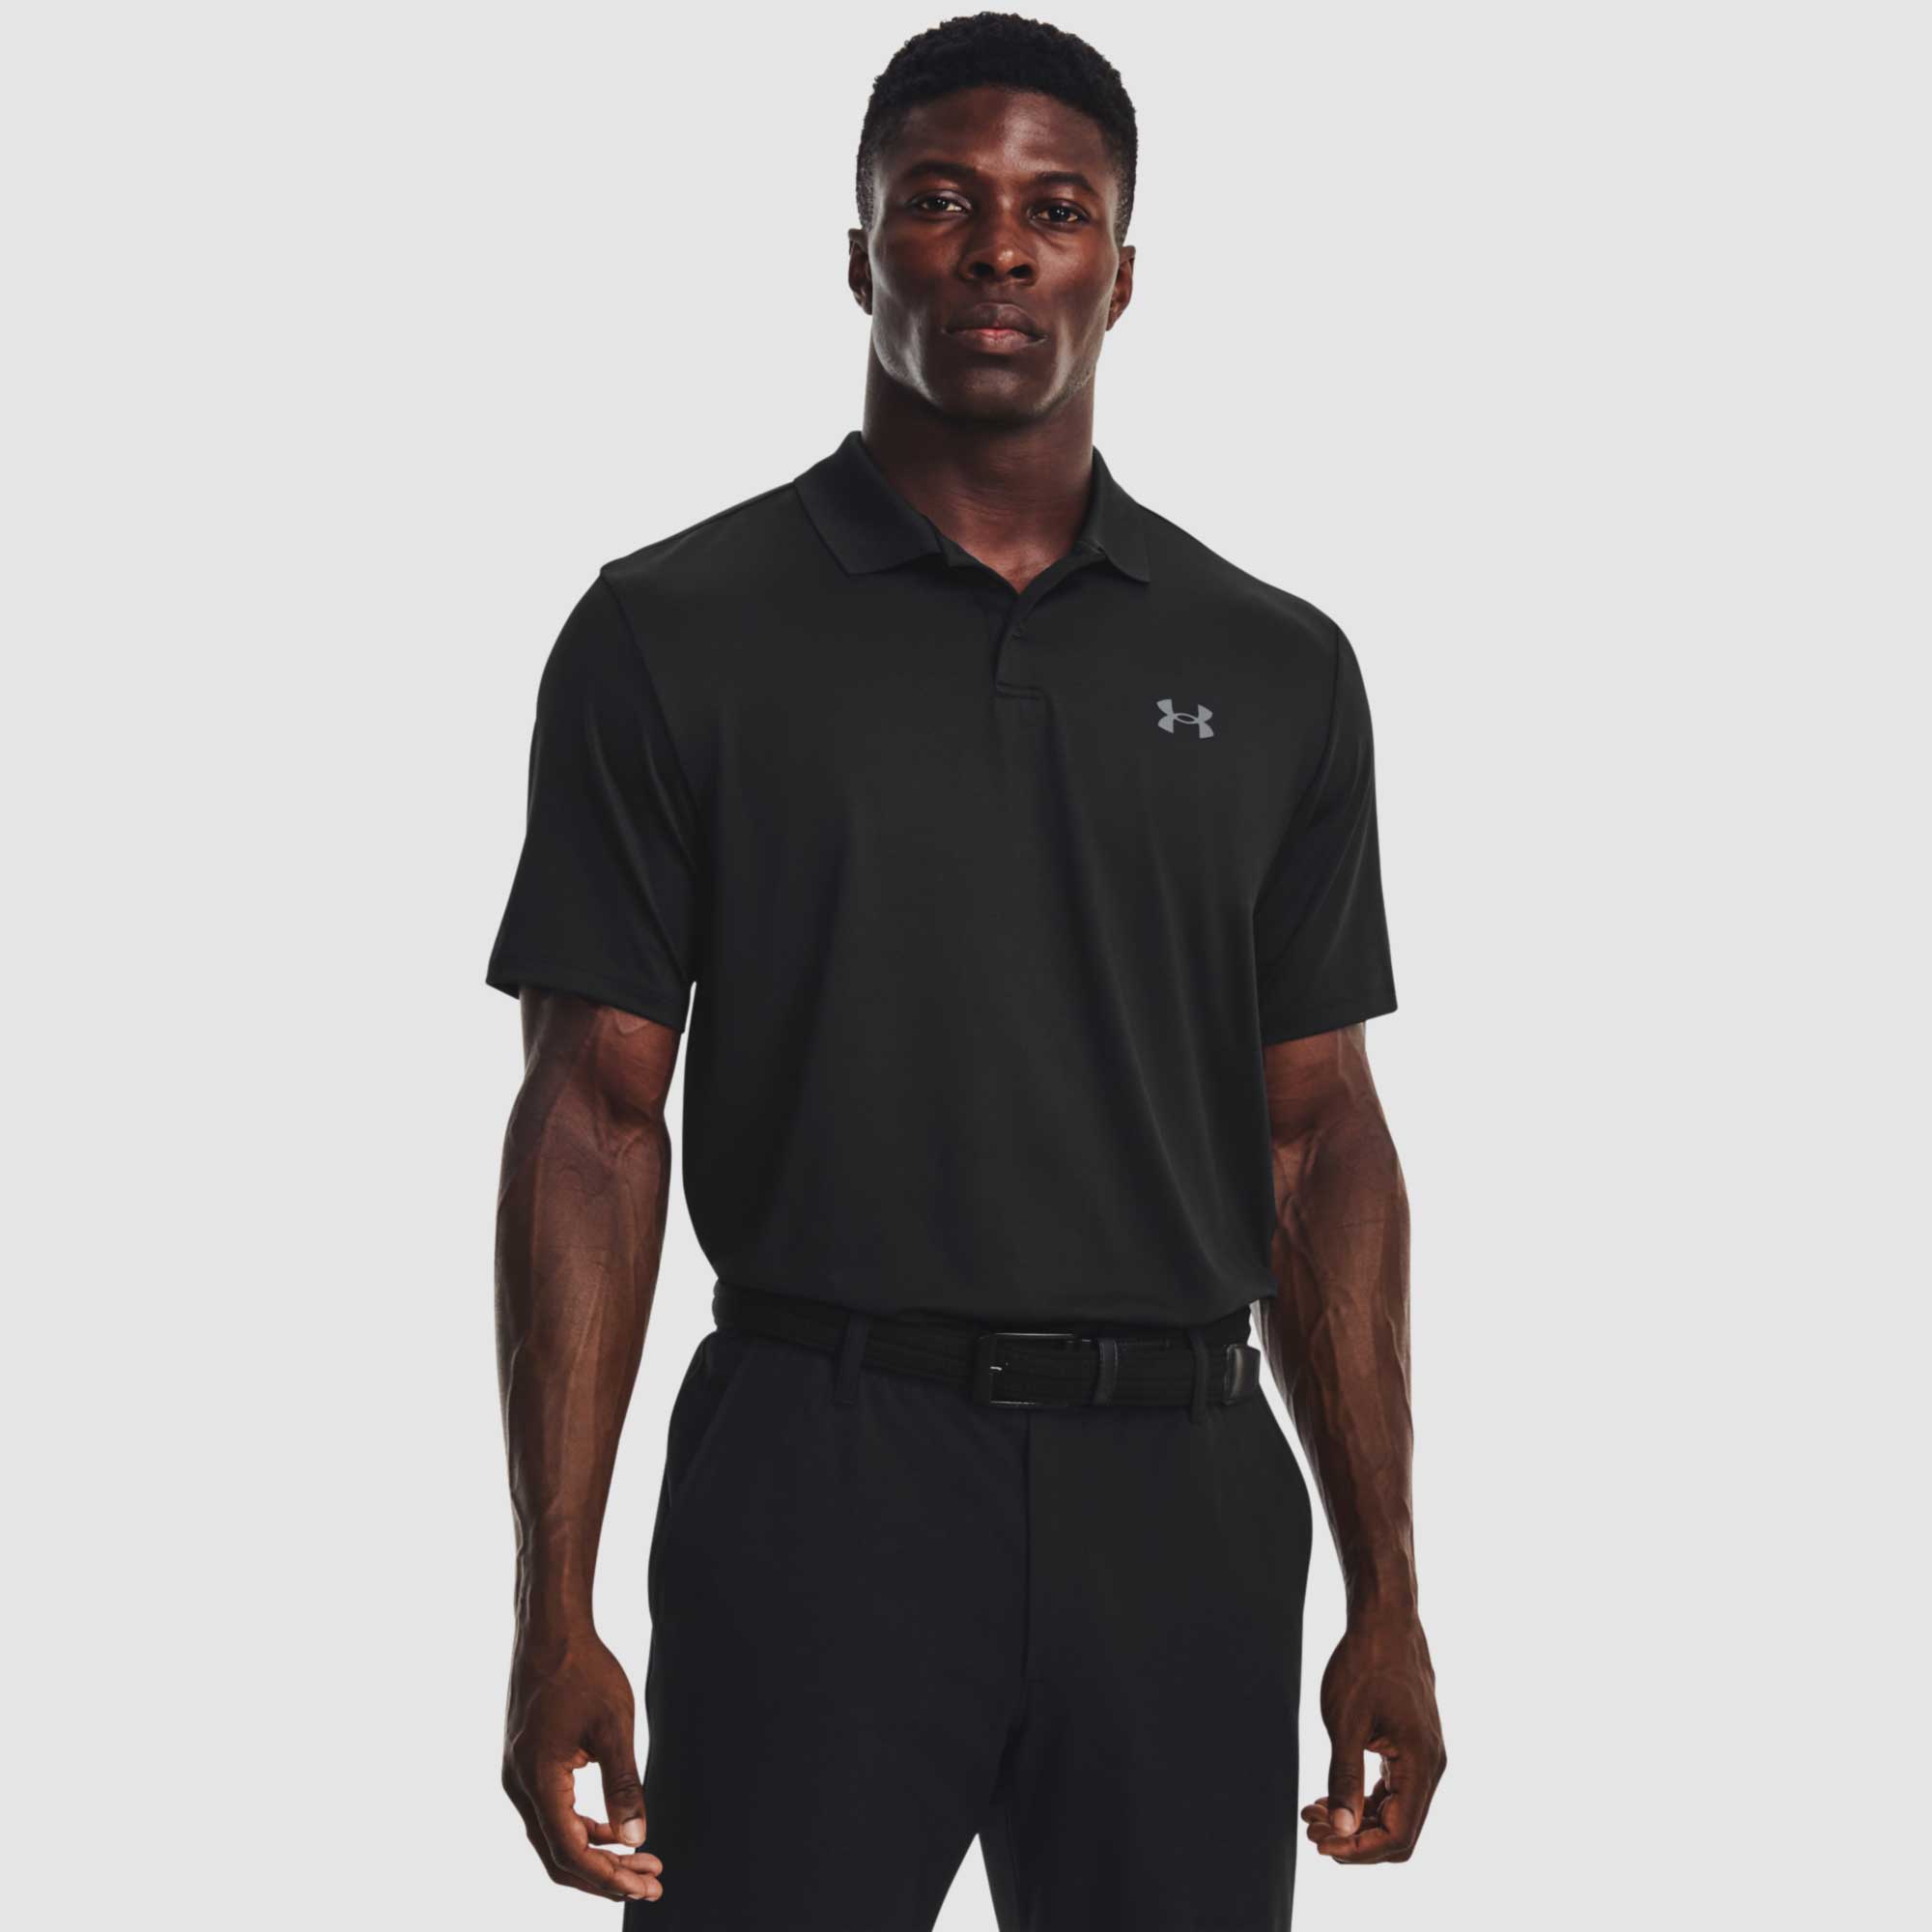 Under Armour Mens Performance 3.0 Polo